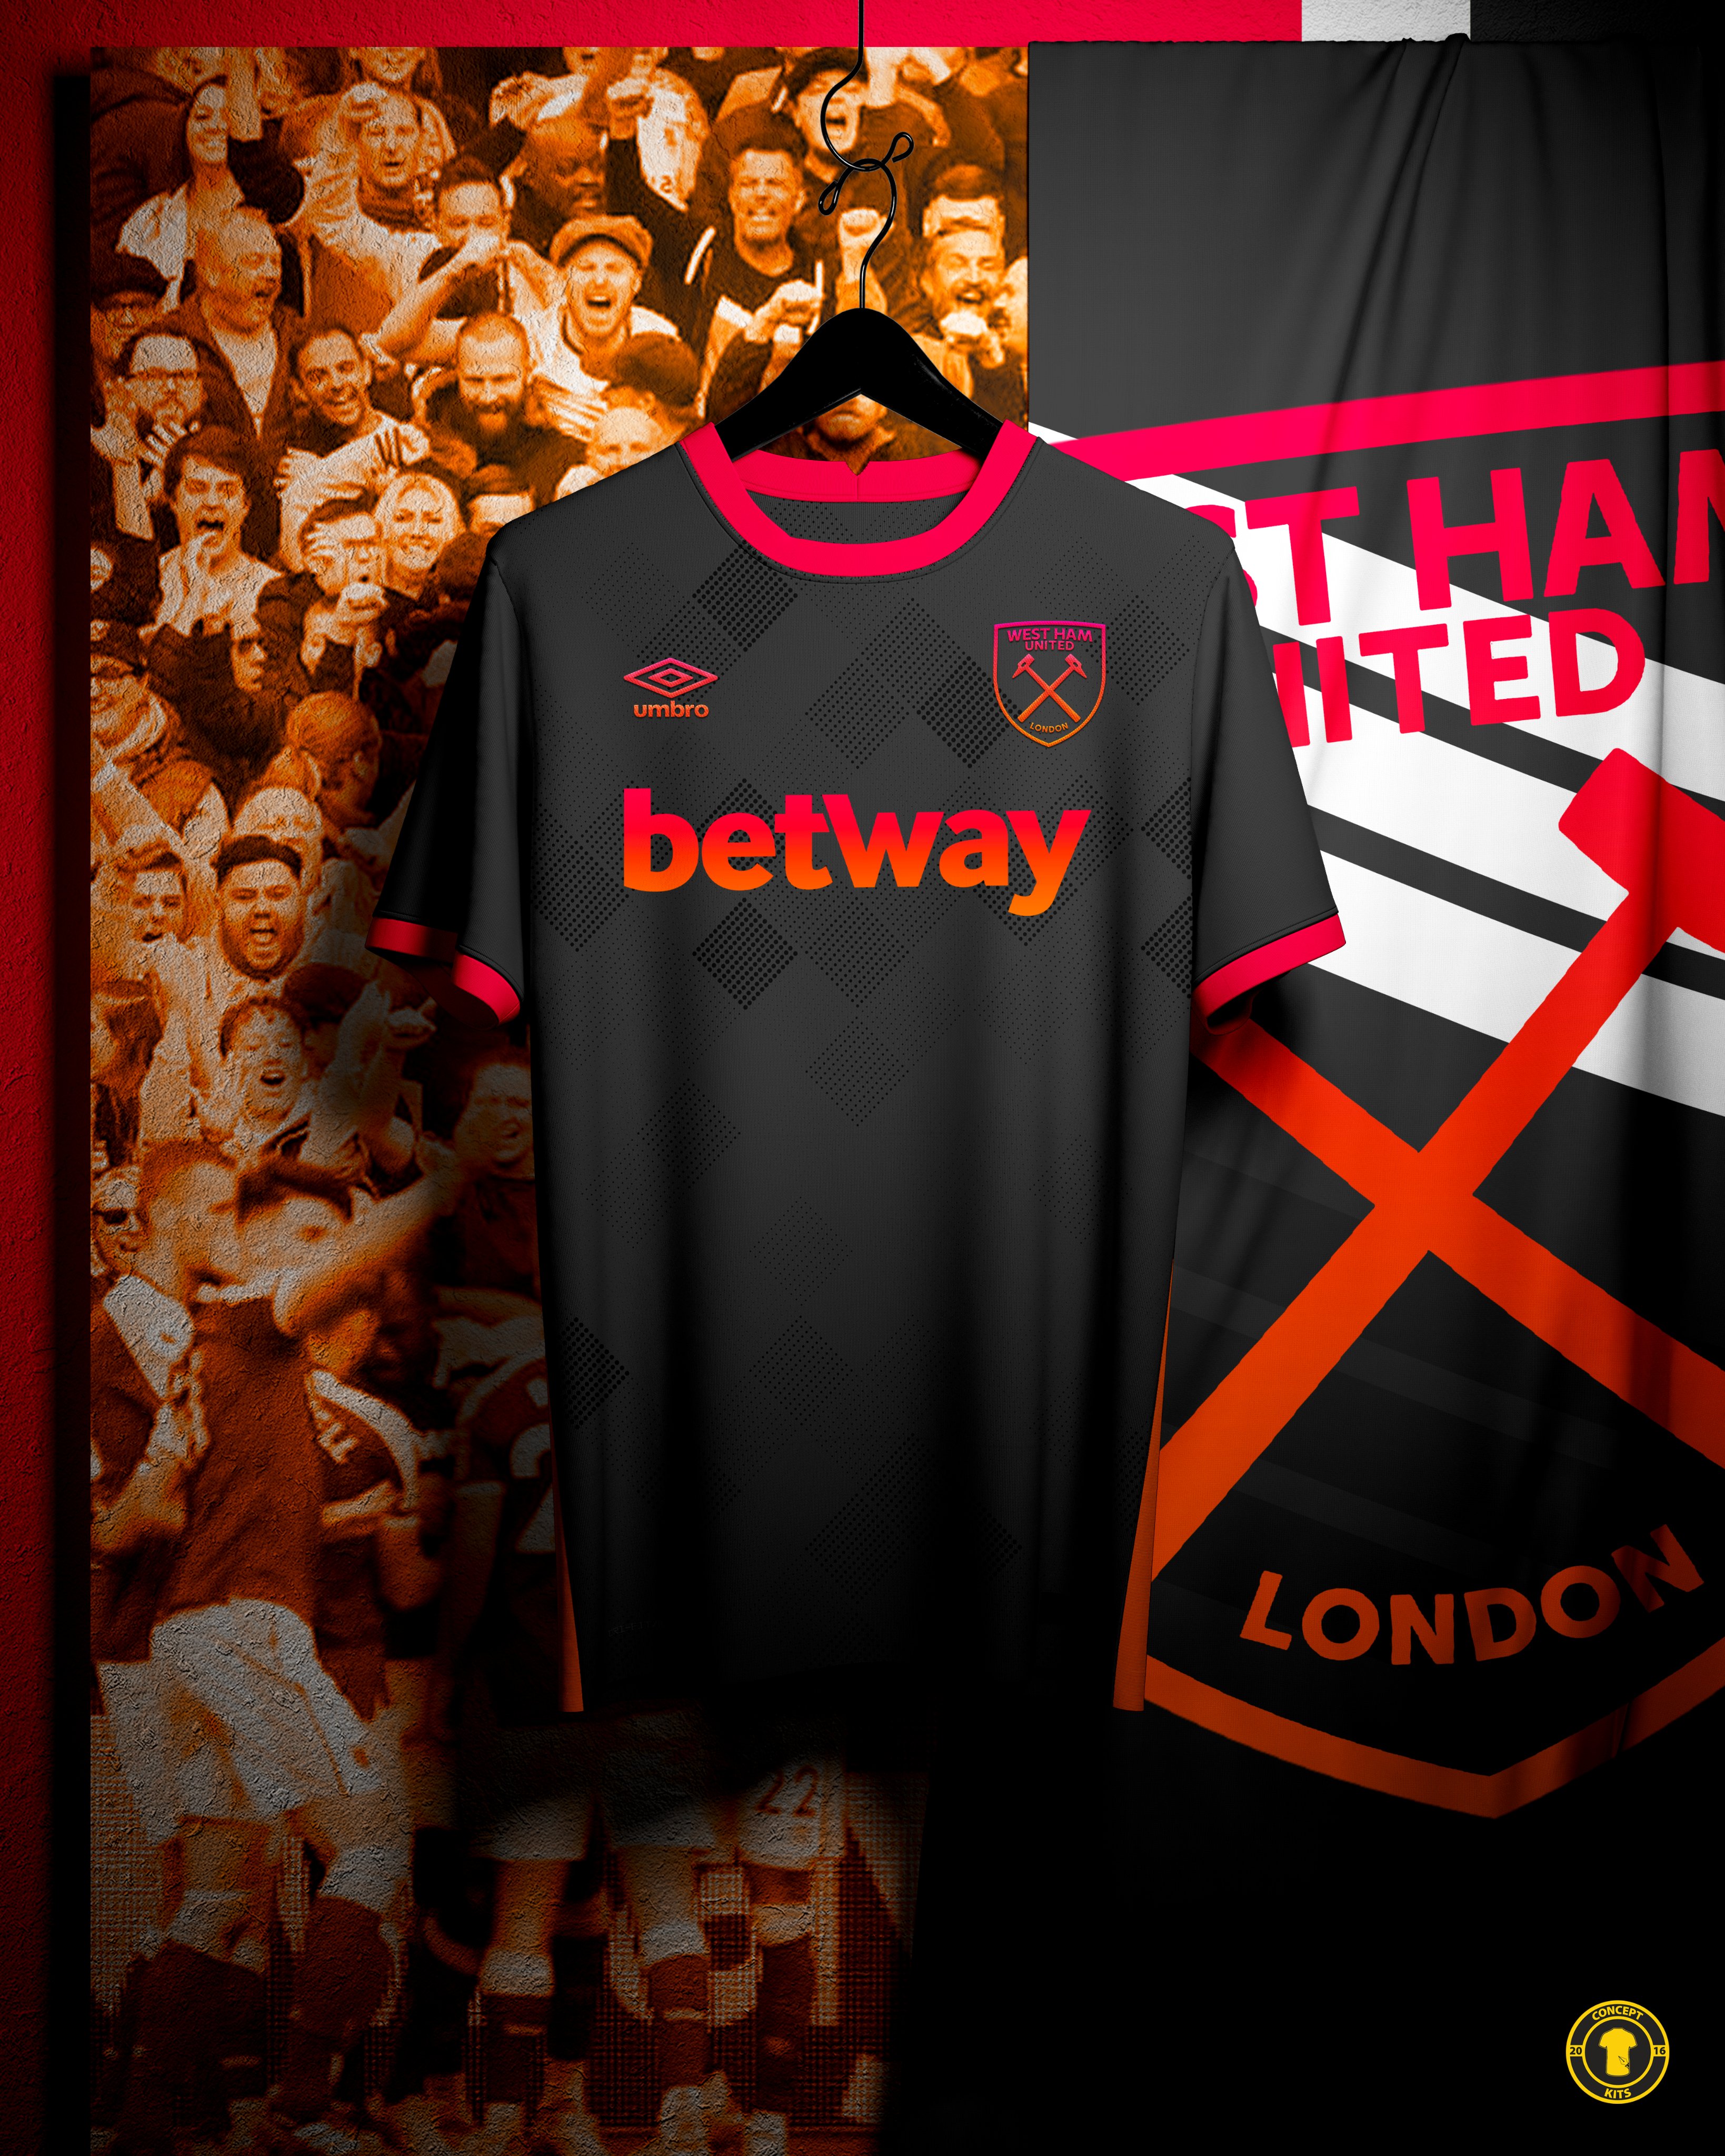 filosofie getuigenis Zeg opzij Concept Kits on Twitter: "West Ham United Football Club home, away and  third kit concepts for the 2022/23 season. #WHUFC #WestHam #WestHamUnited  #WHU #COYI #Irons #Umbro #WestHamUtd #Hammers https://t.co/5CJYt2hMH5" /  Twitter